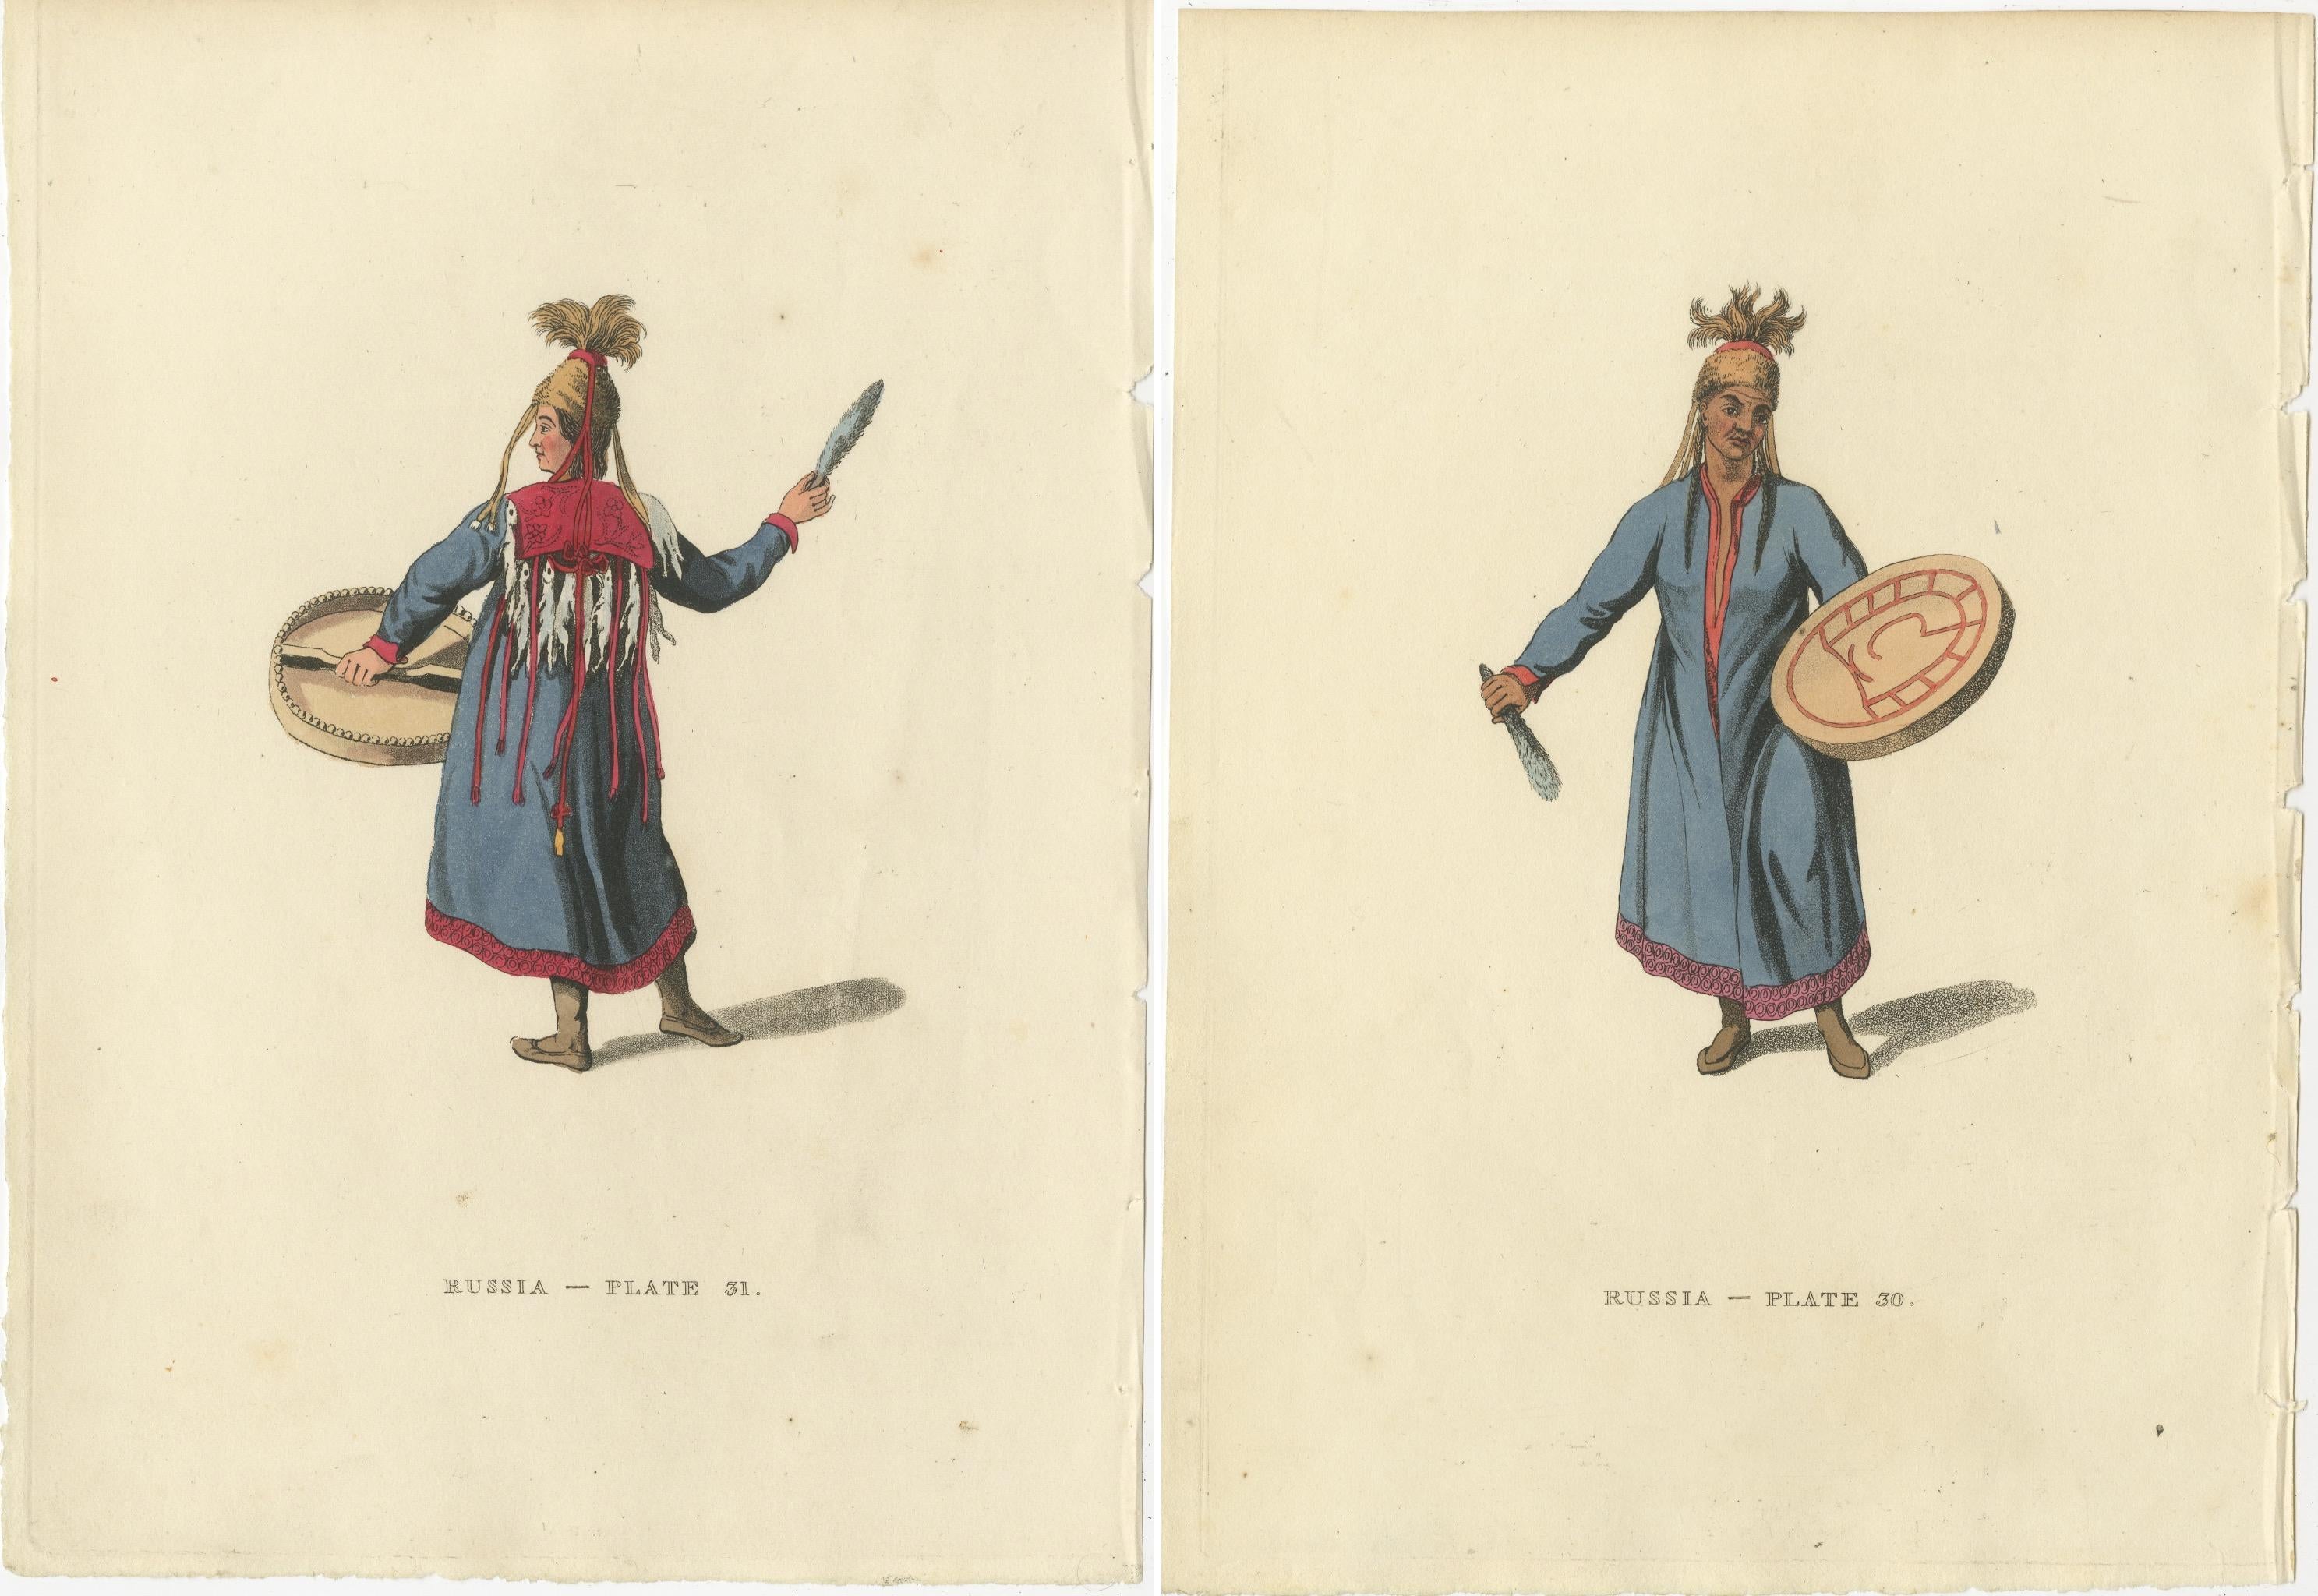 The two original antique engravings present a detailed look at the ceremonial dress of a Female Shaman from the indigenous peoples of Russia, illustrating both the front and back views.

1. The first engraving depicts the Female Shaman in a standing